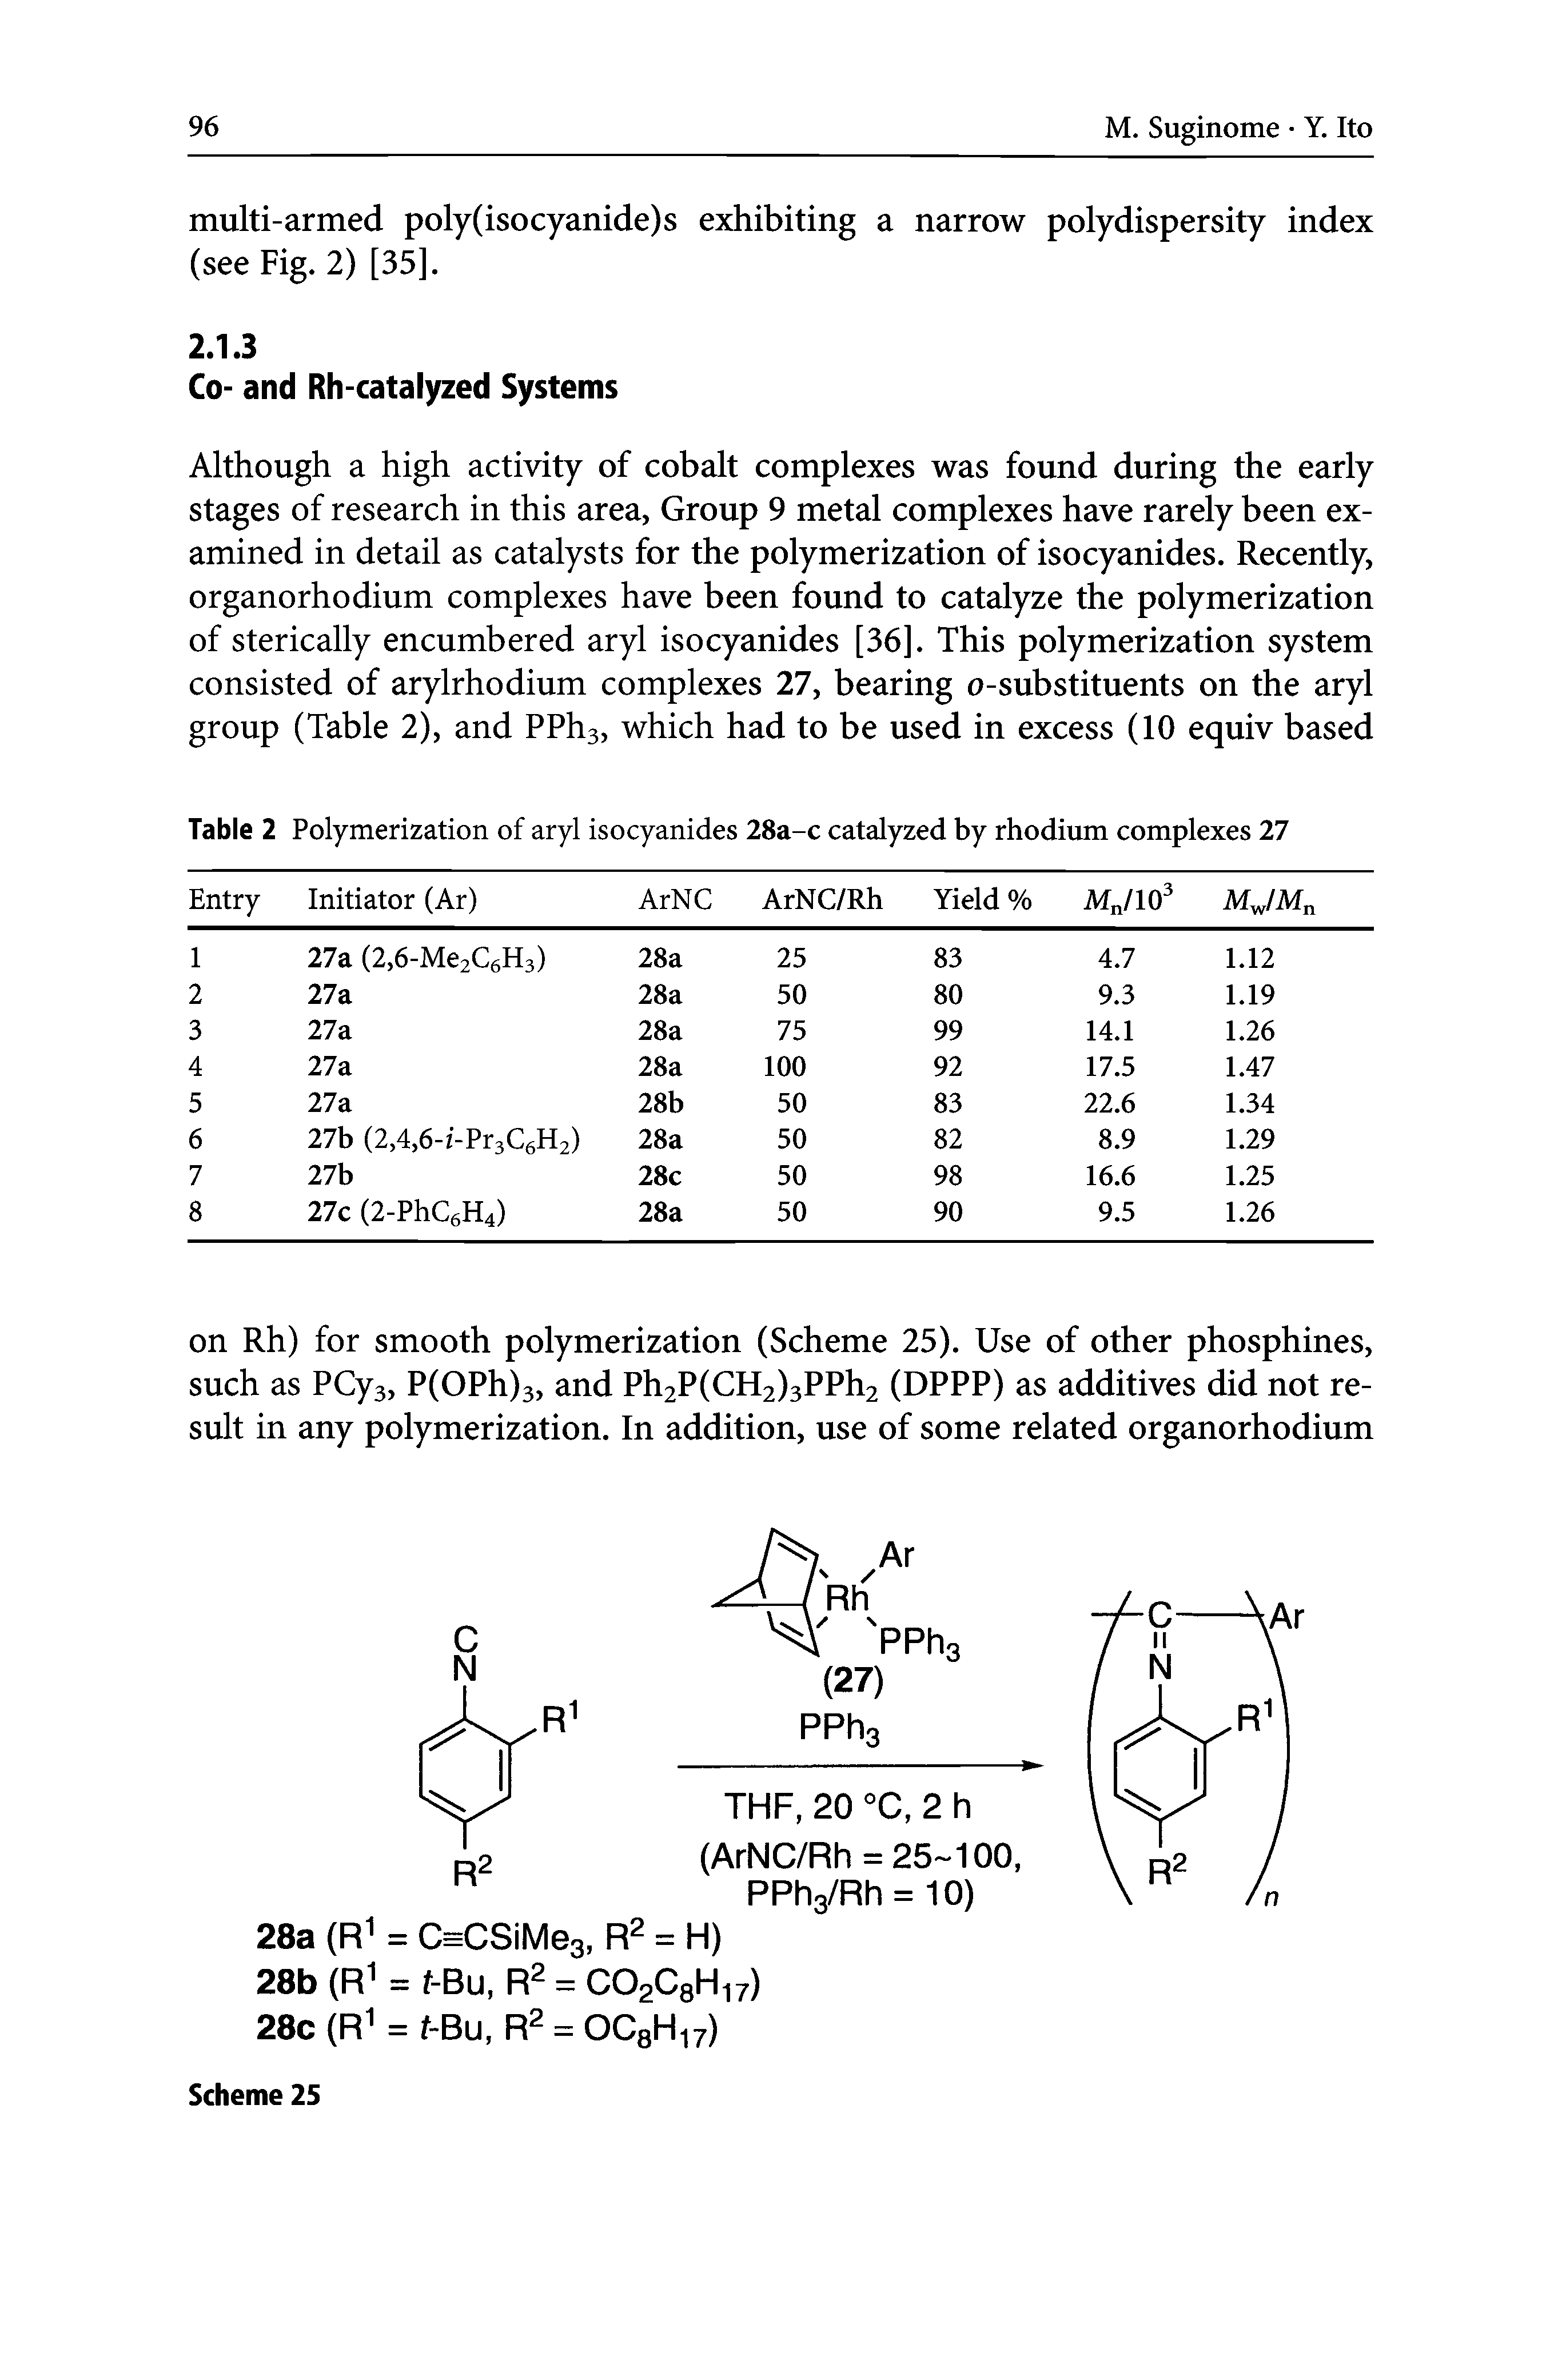 Table 2 Polymerization of aryl isocyanides 28a-c catalyzed by rhodium complexes 27...